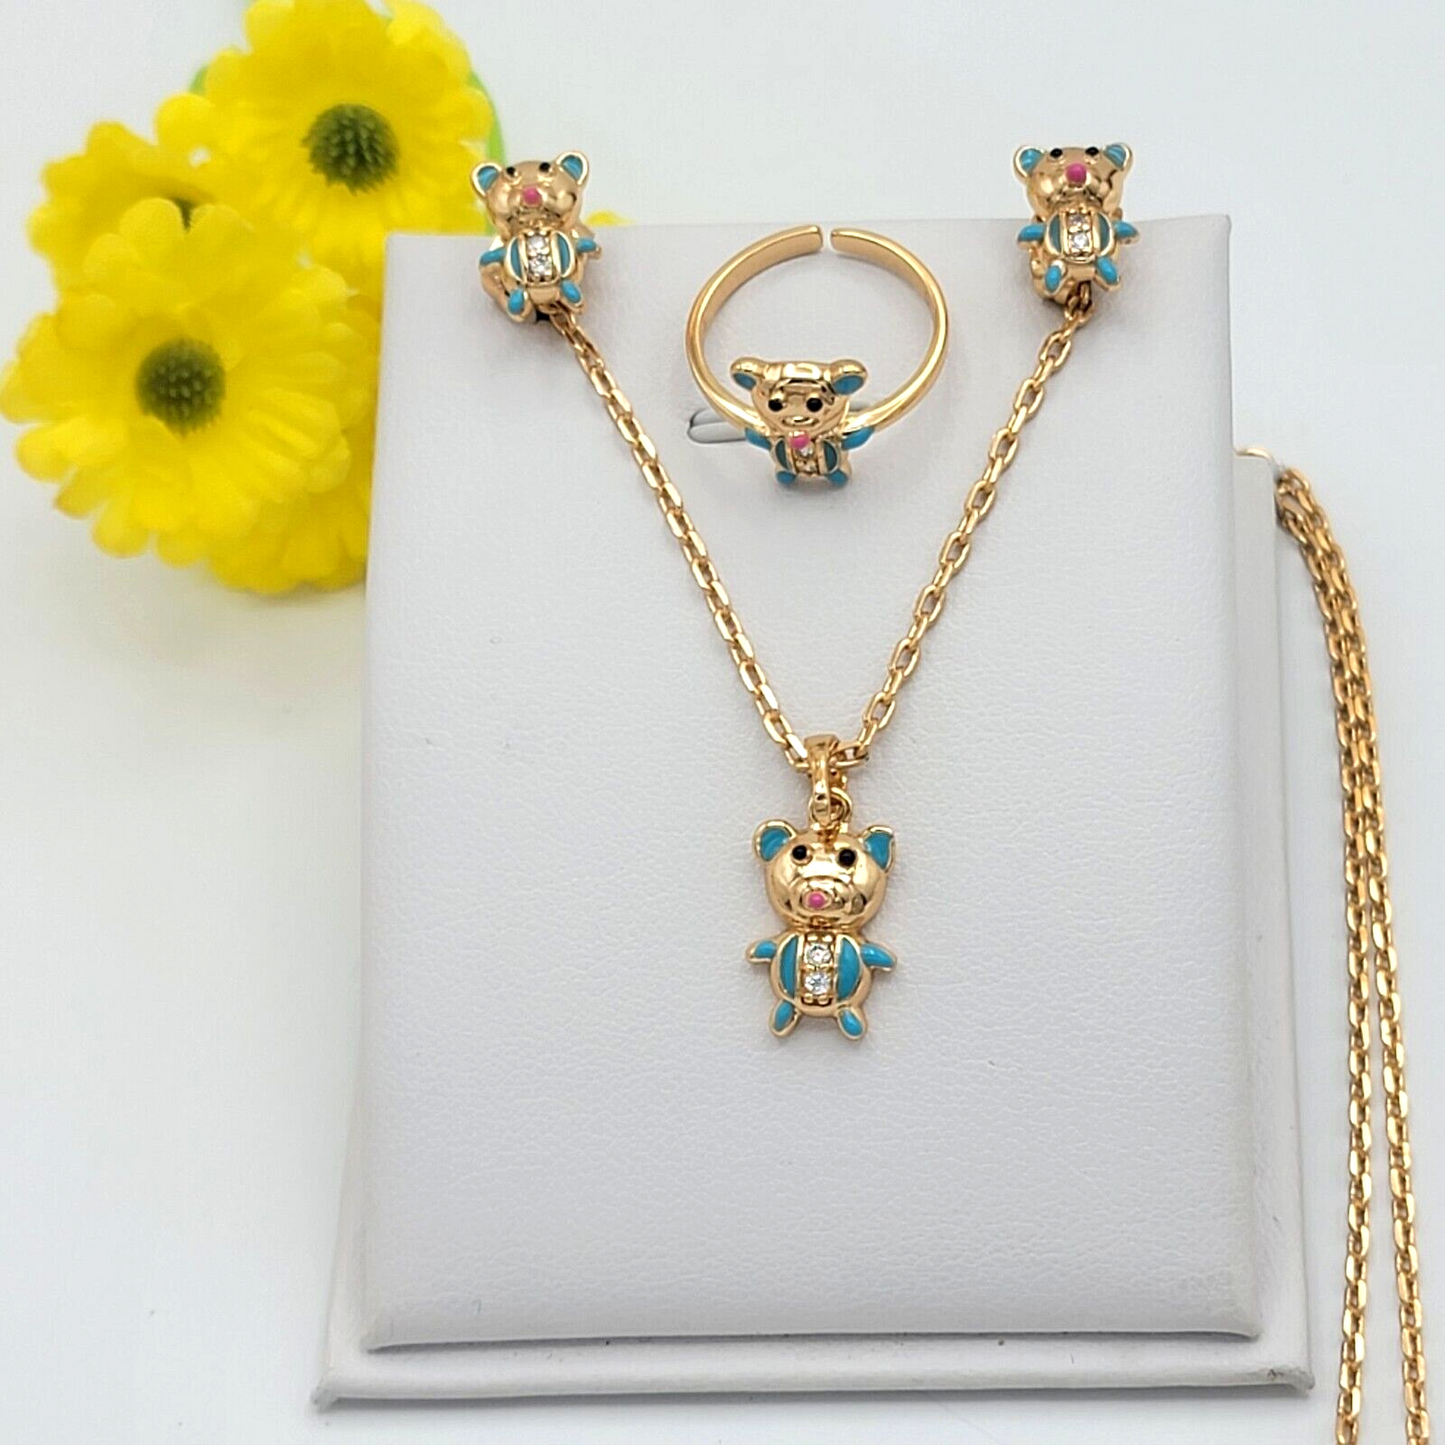 Sets - 18K Gold Plated. Blue Bear Teddy Necklace - Earrings - Ring Set. For Kids. Girls